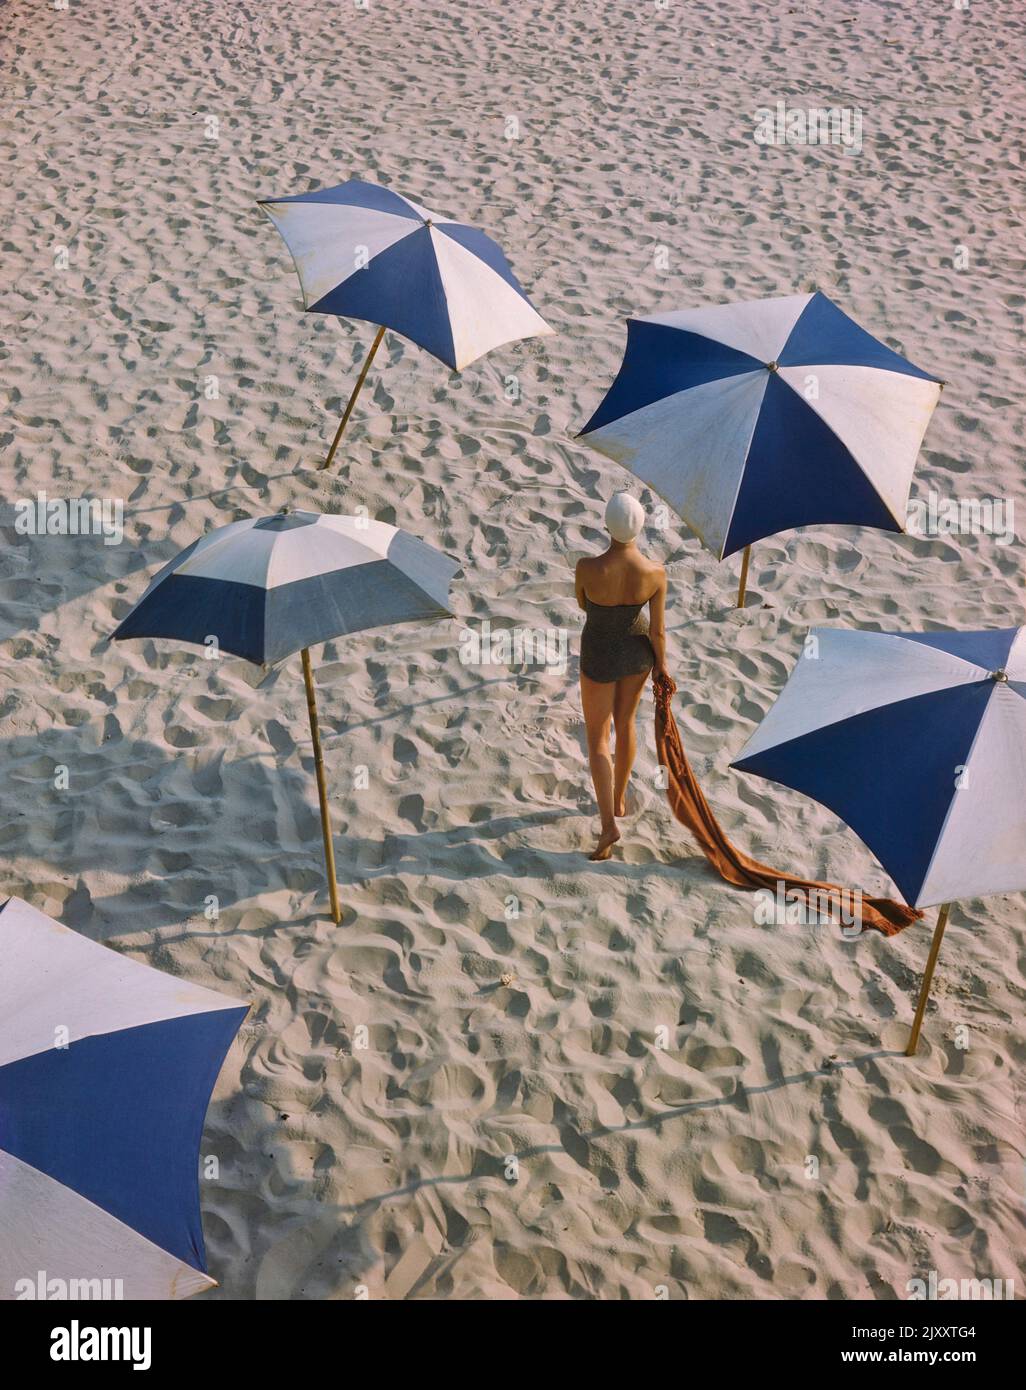 Rear View Portrait of Woman in One-Piece Swimsuit surrounded by Umbrellas on Beach, Toni Frissell Collection, December 1948 Stock Photo